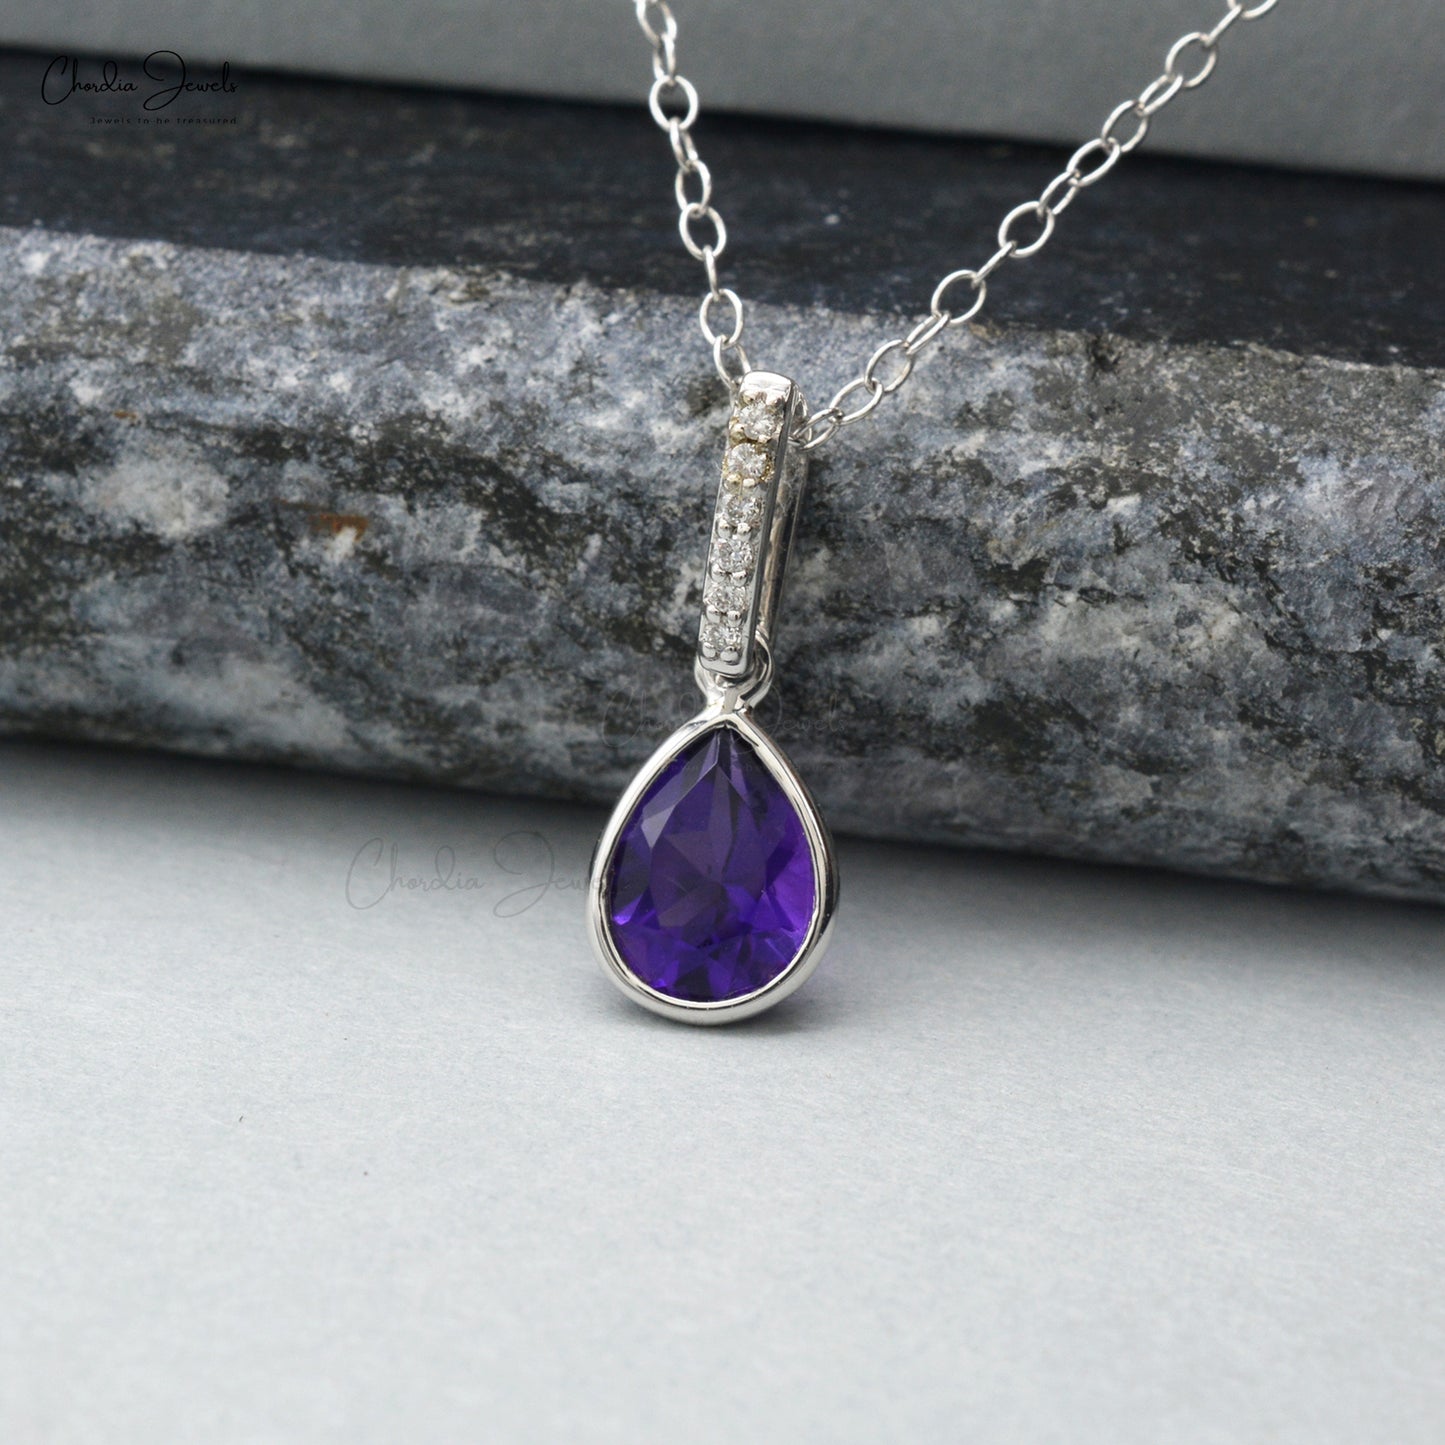 Dulcia Necklace with Oval Amethyst | 0.35 carats Oval Amethyst Unique  Pendant in 14k White Gold | Diamondere